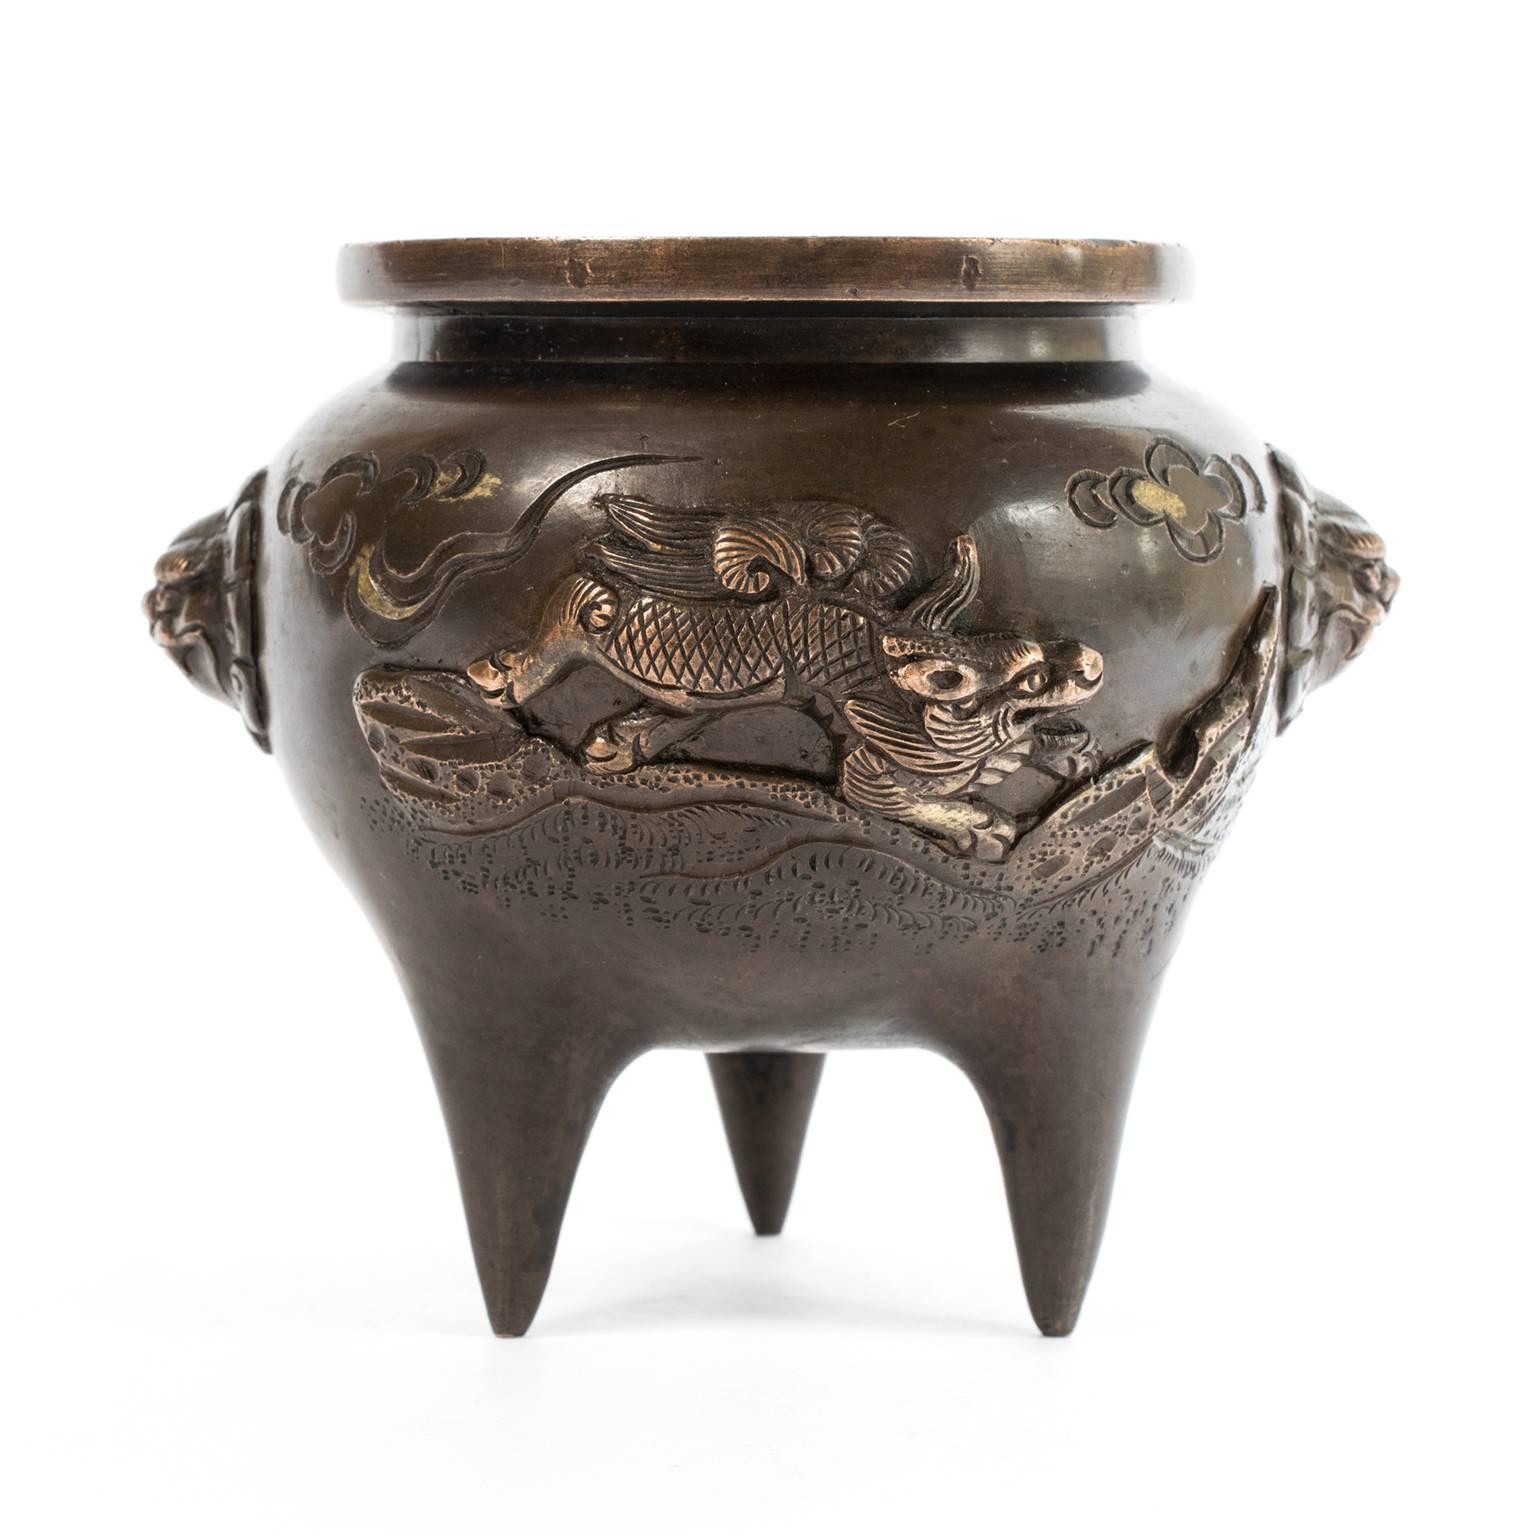 The tripod shape of this finely crafted bronze incense burner is a classical form first appearing in Chinese ceramics and bronzes thousands of years ago. The bronze casting of this burner is exquisite: The monkey and mythical qilin on the surface